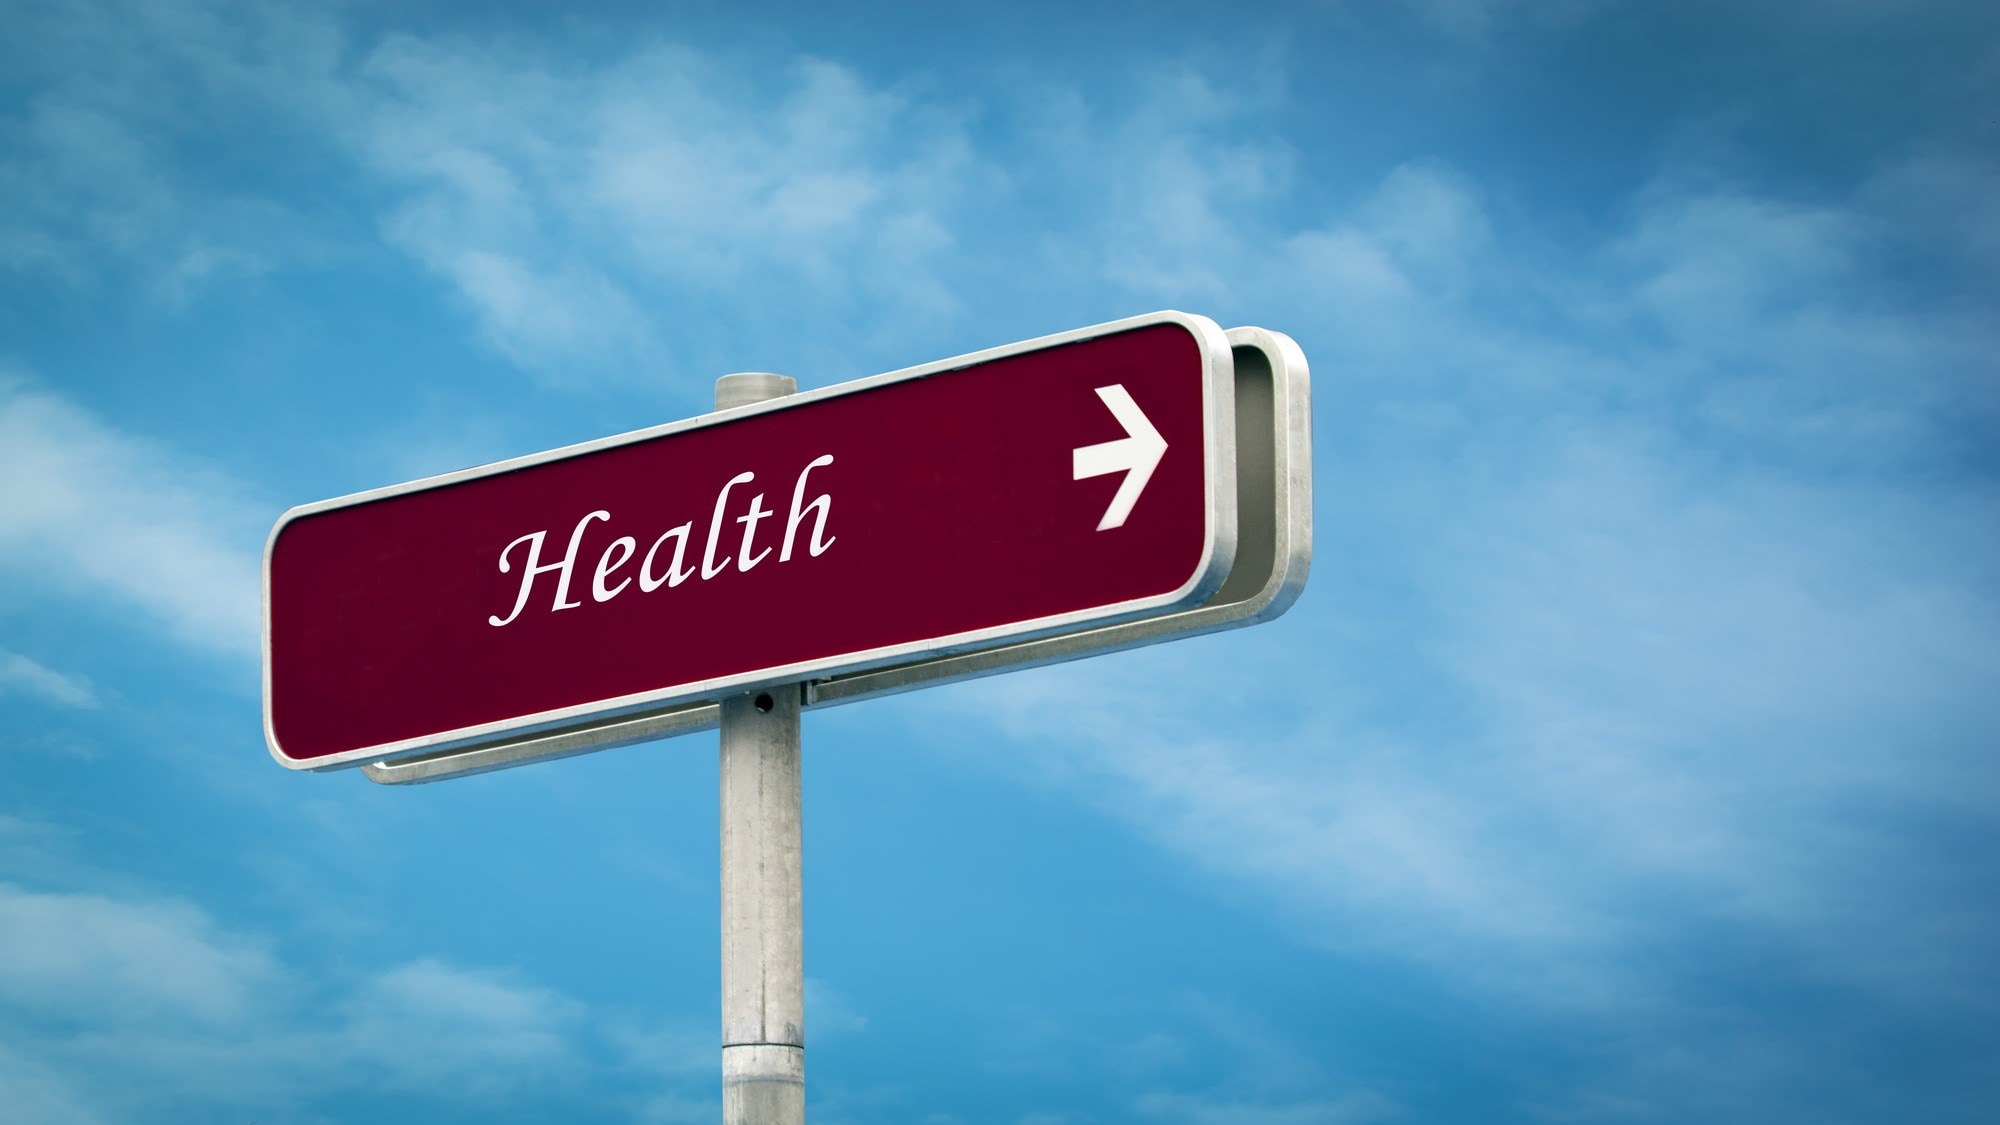 Street sign with the word "Health" written on it.